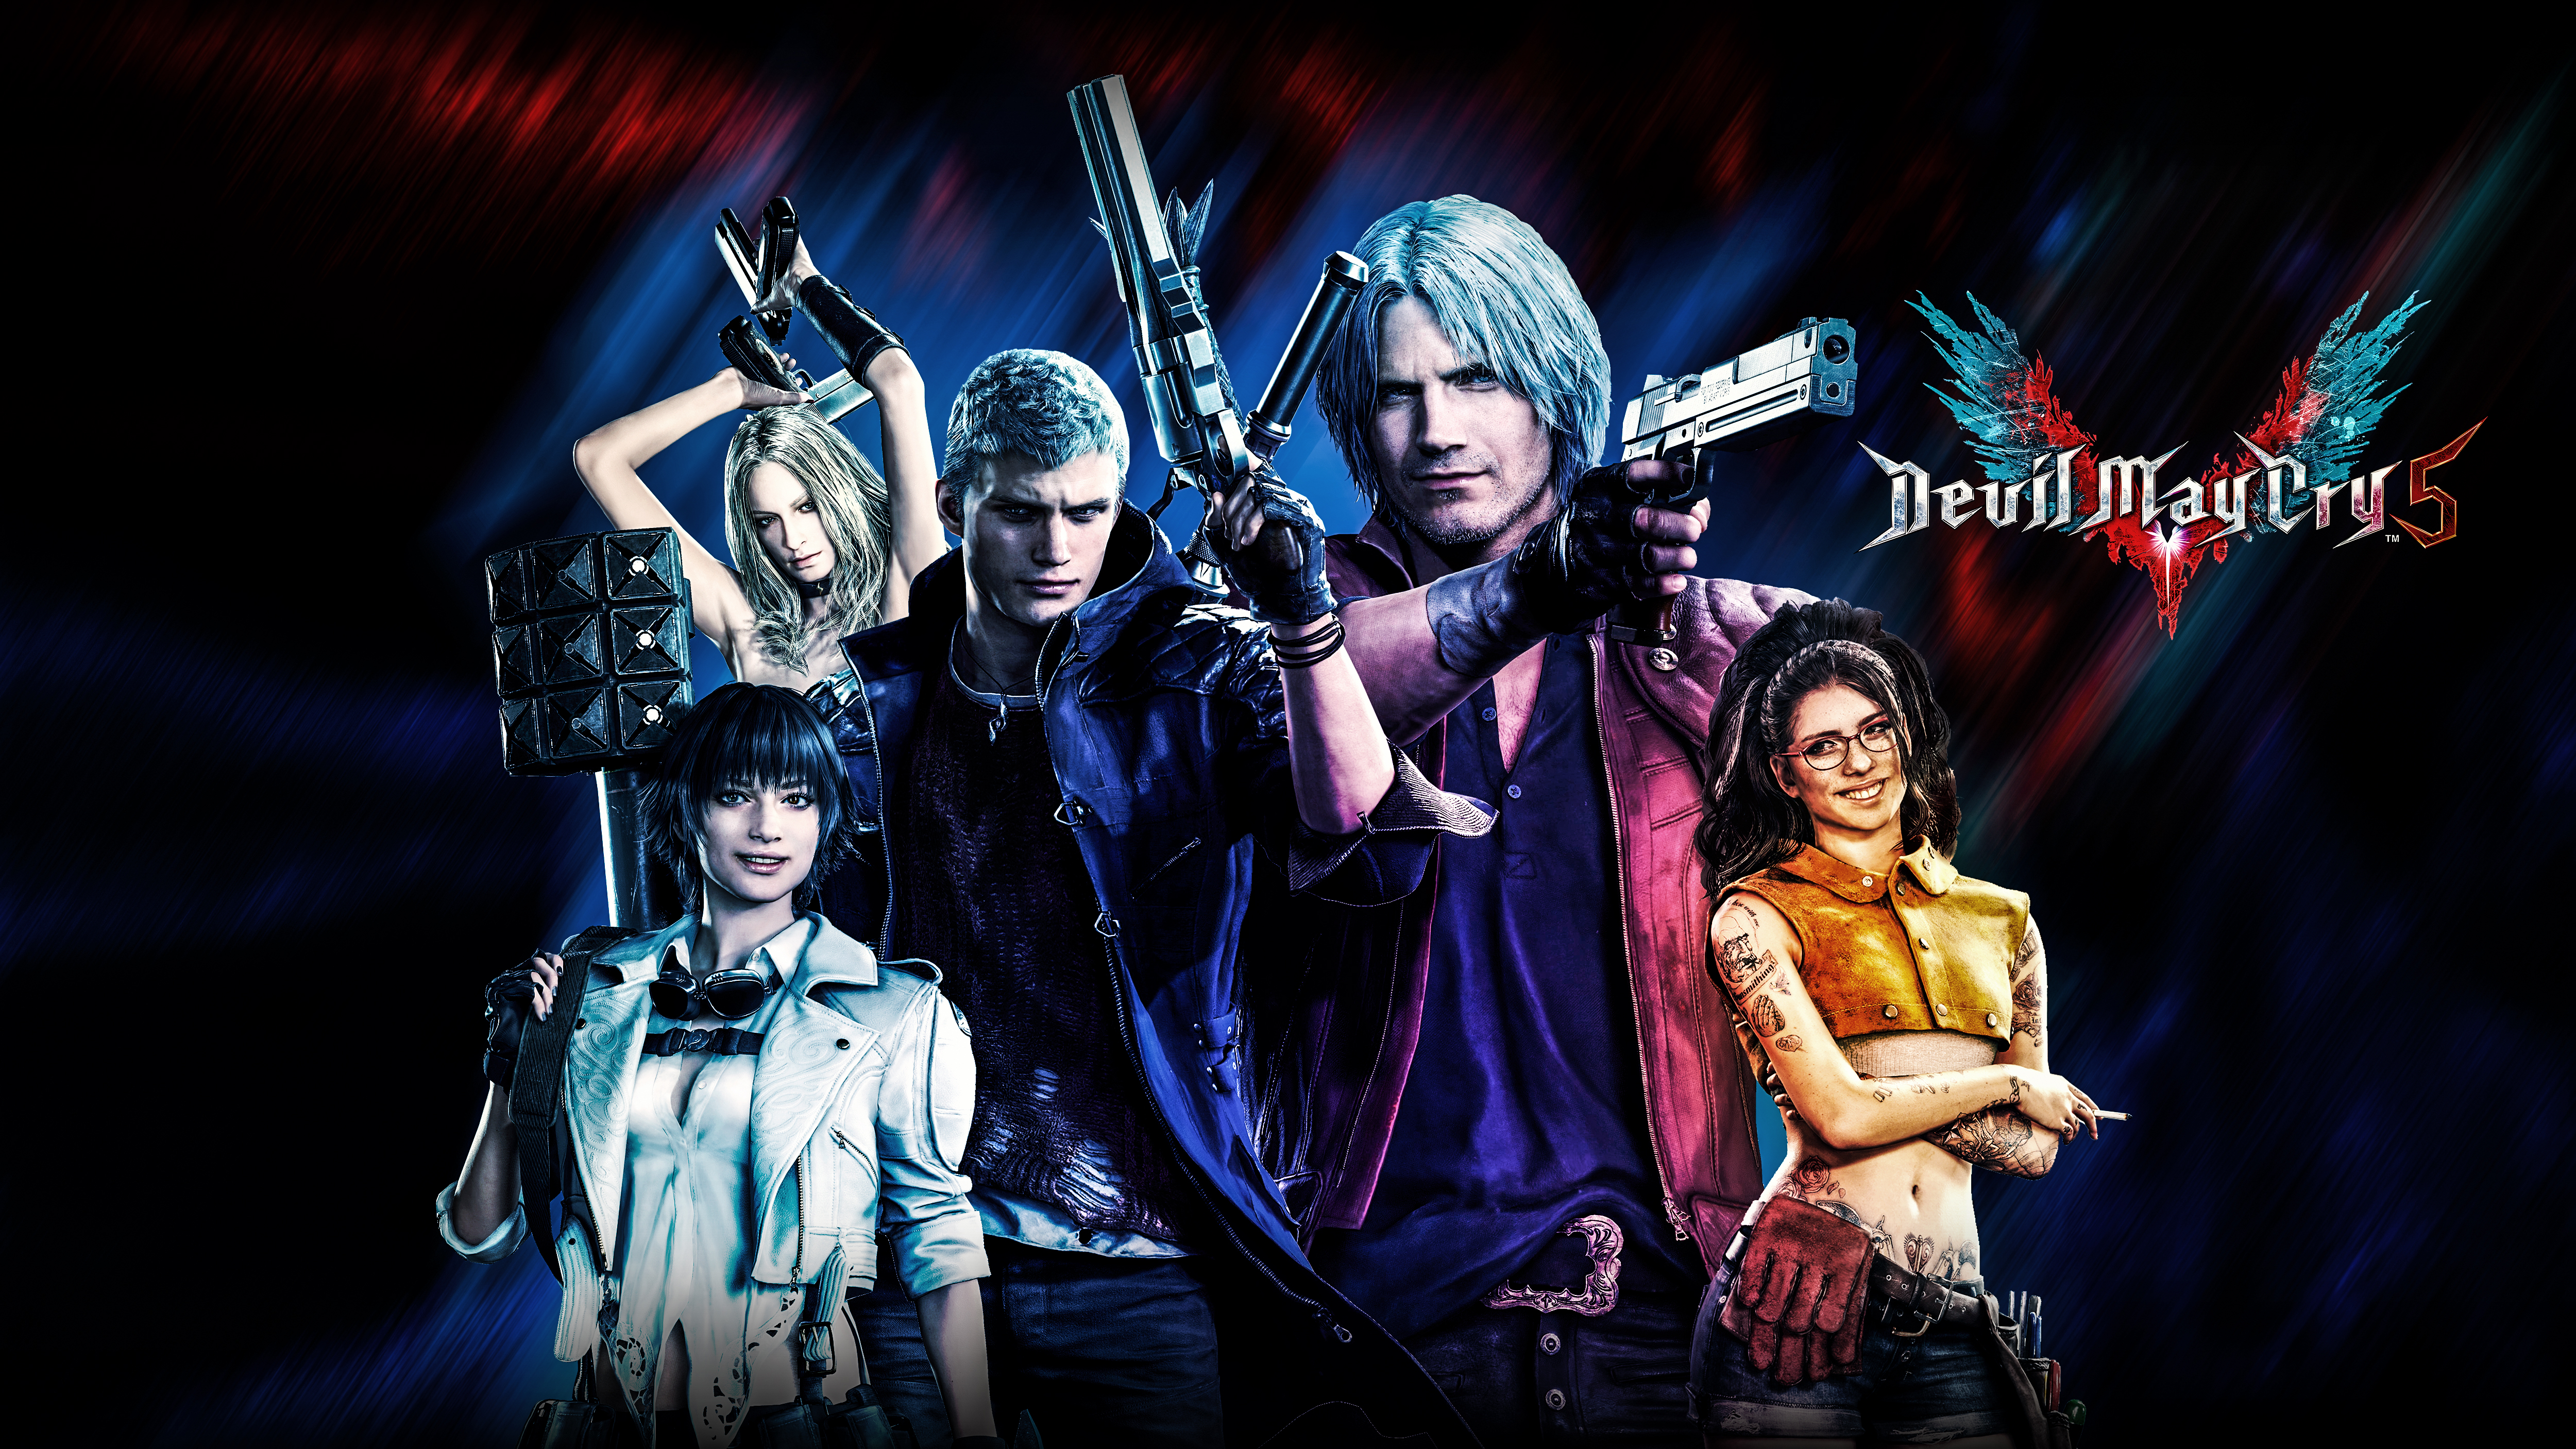 video game, devil may cry 5, dante (devil may cry), lady (devil may cry), nero (devil may cry), nico (devil may cry), trish (devil may cry), devil may cry